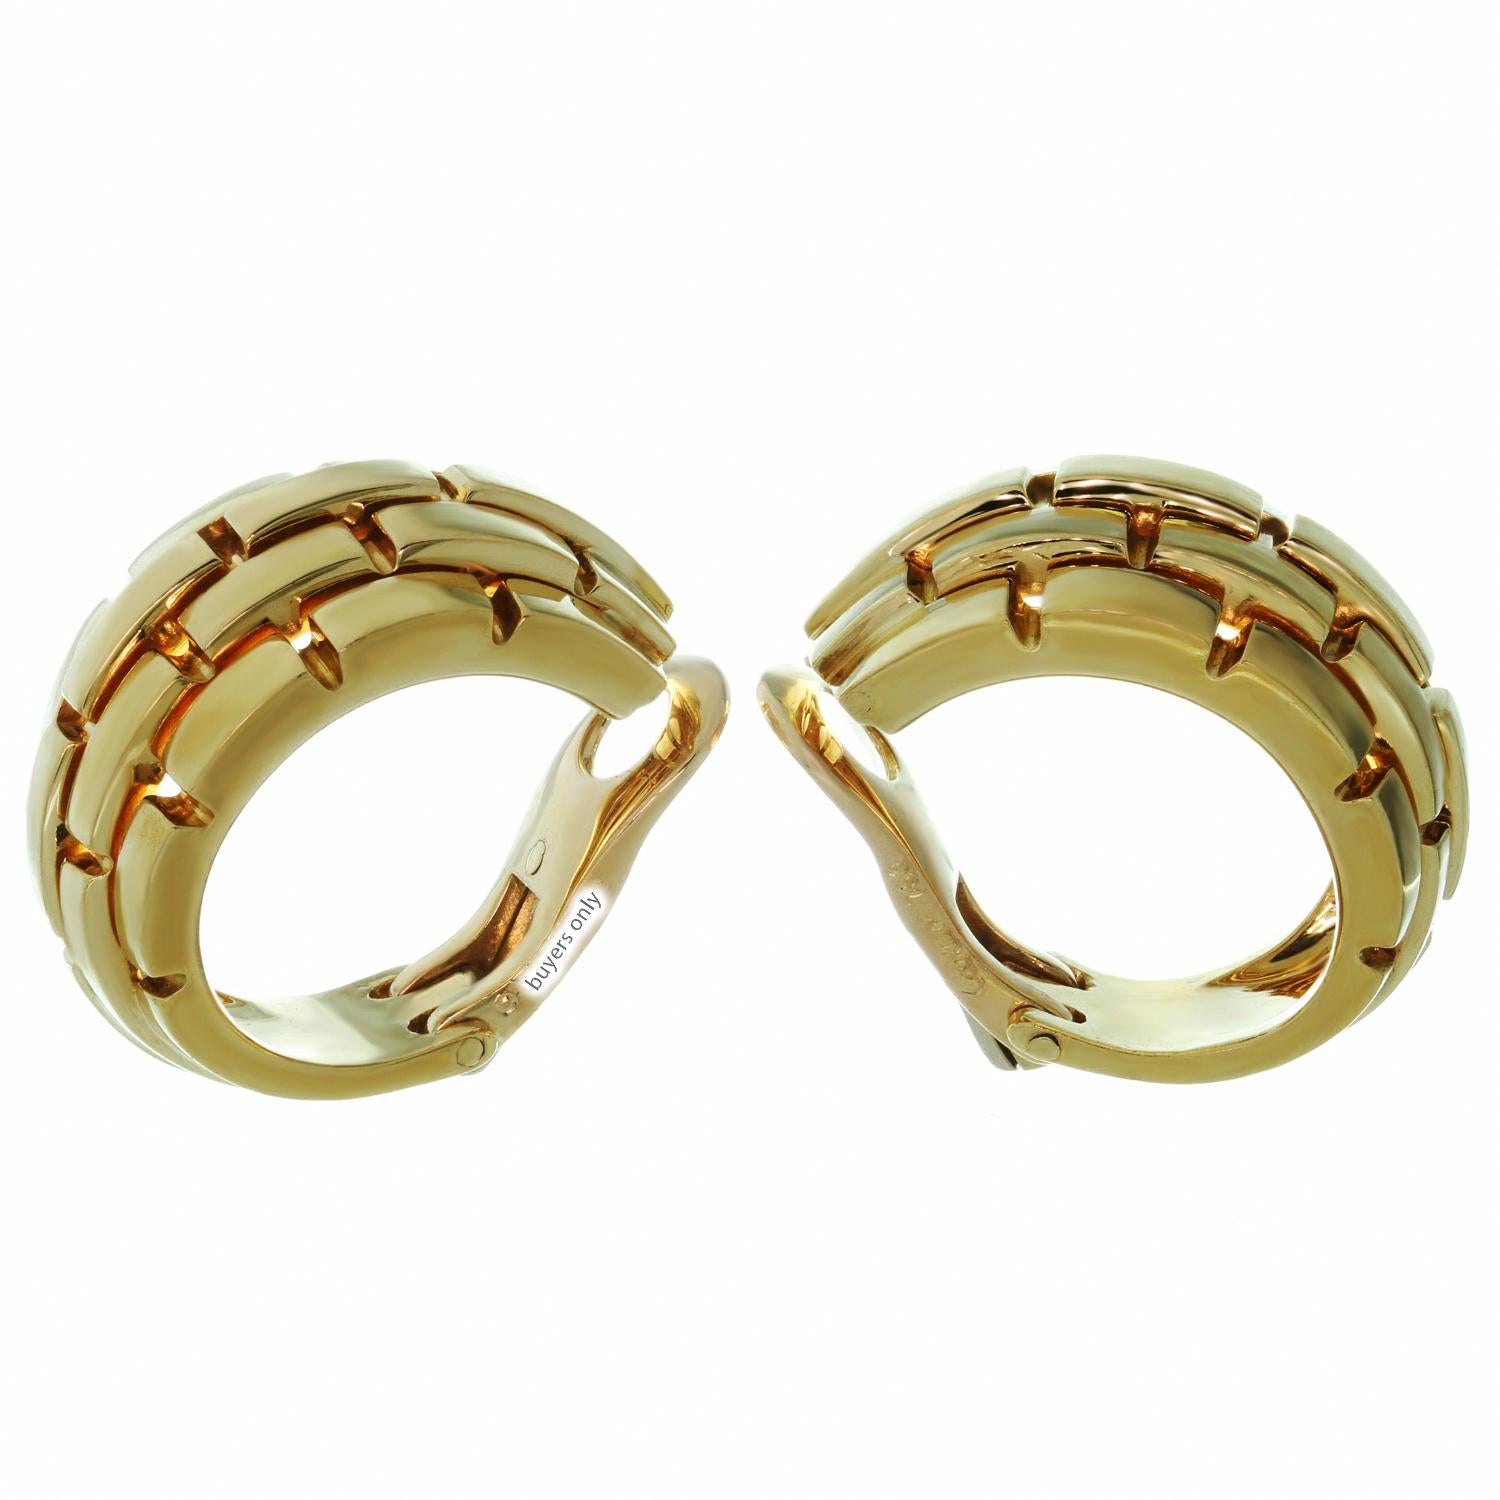 These classic Cartier wrap earrings from the iconic Maillon Panthere collection feature 5 rows of rectangular links crafted in 18k yellow gold. Made in France circa 2000s. Measurements: 0.47